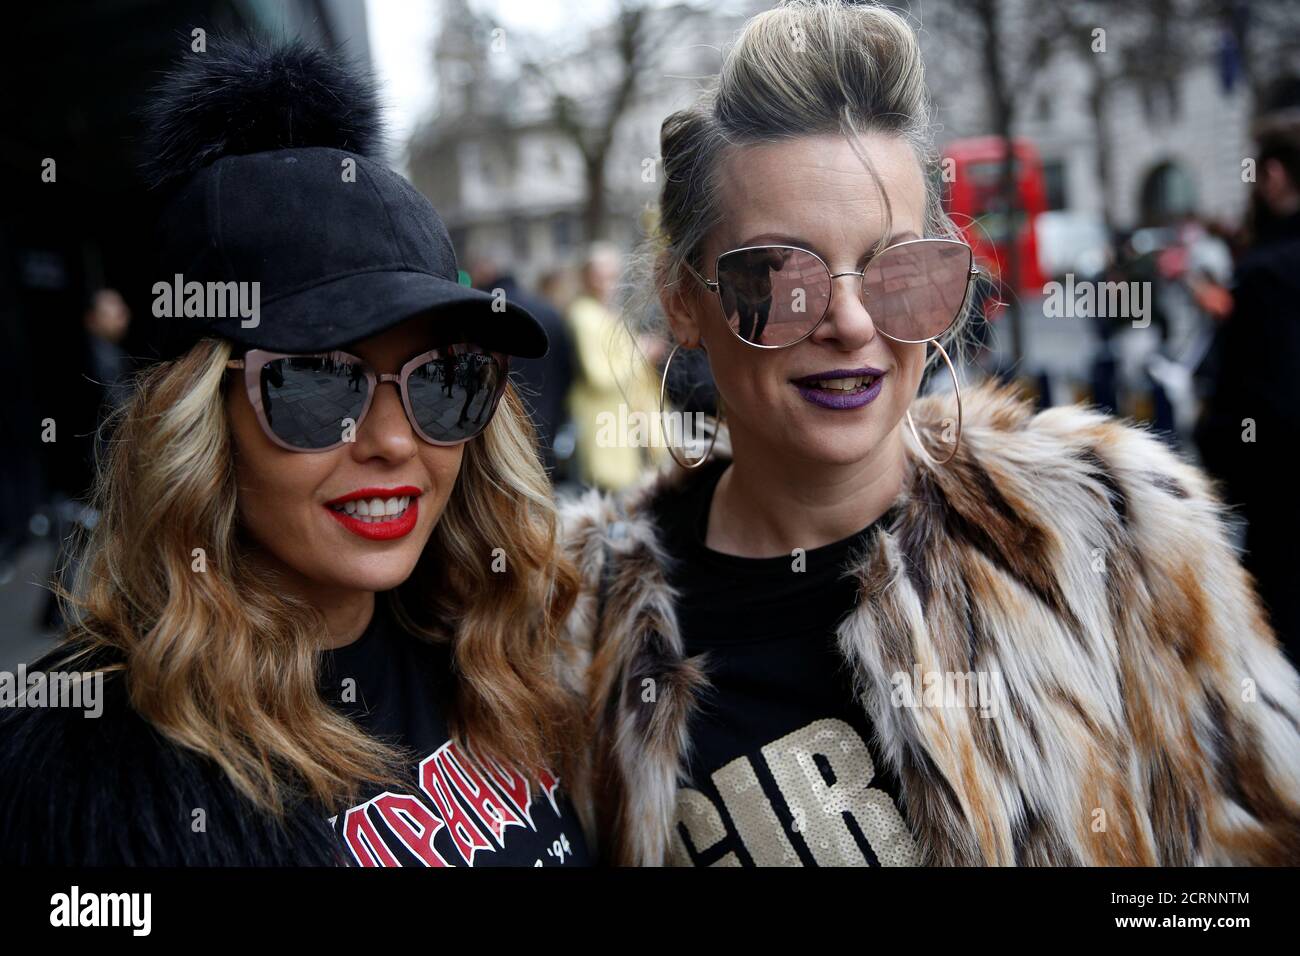 Fashion writers Vered Horen and Shiri Wizner pose for a portrait during London Fashion Week in London, Britain February 21, 2017. REUTERS/Neil Hall Stock Photo